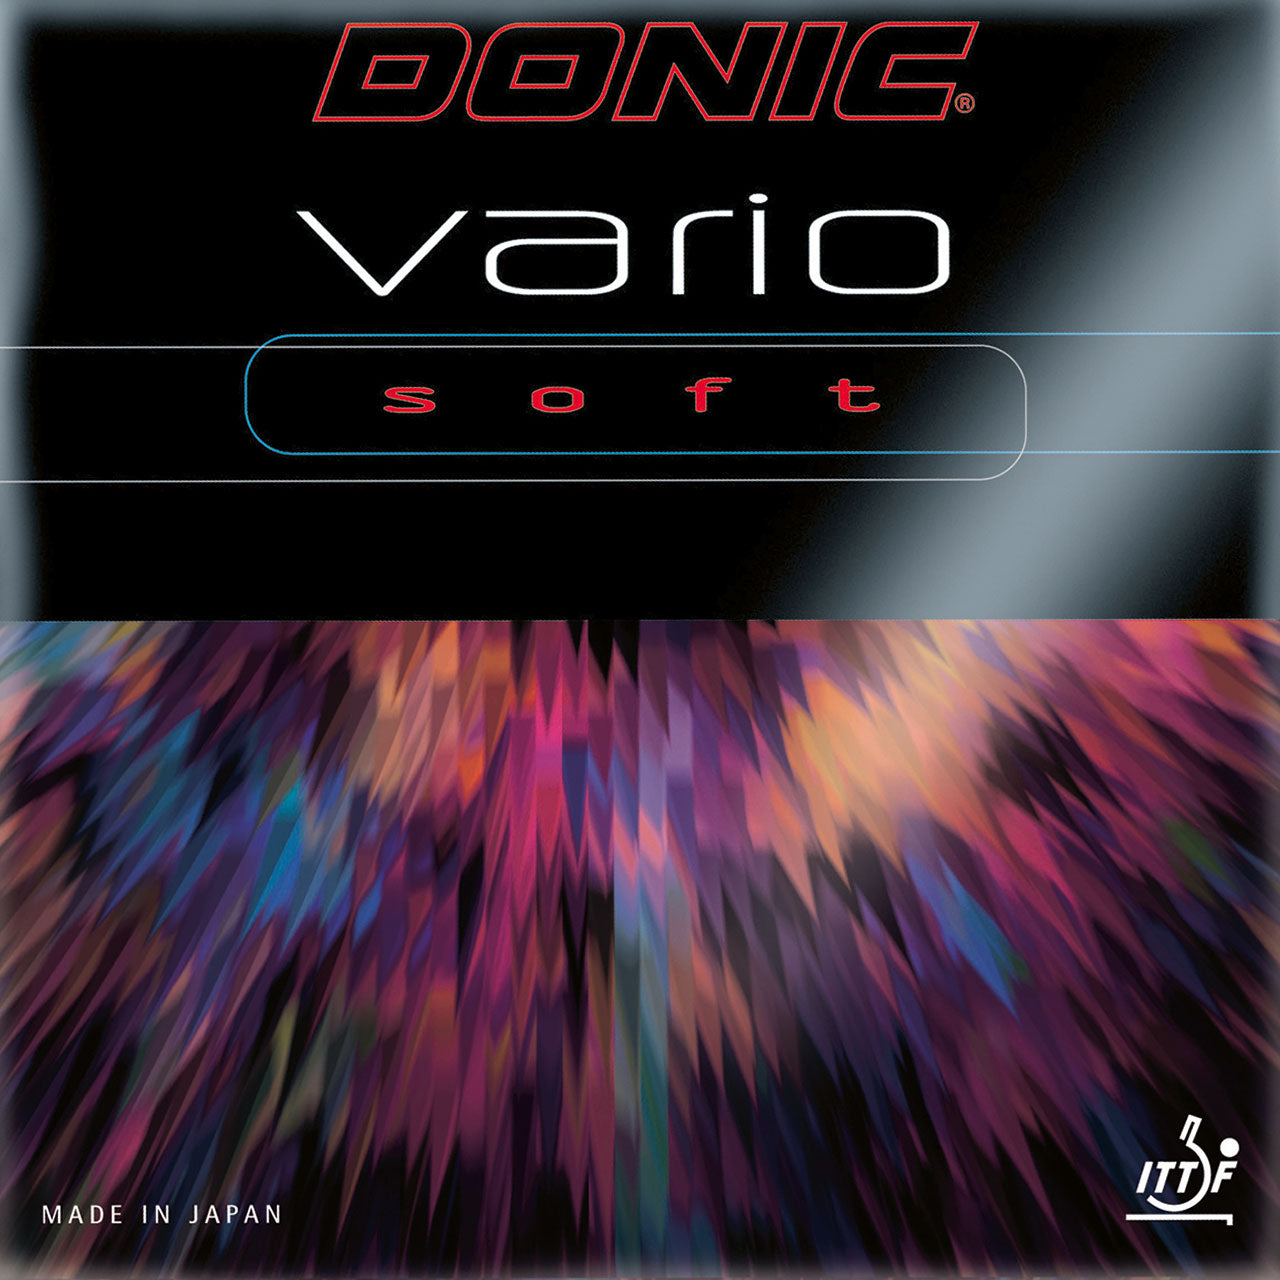 Donic Vario Soft - Killypong